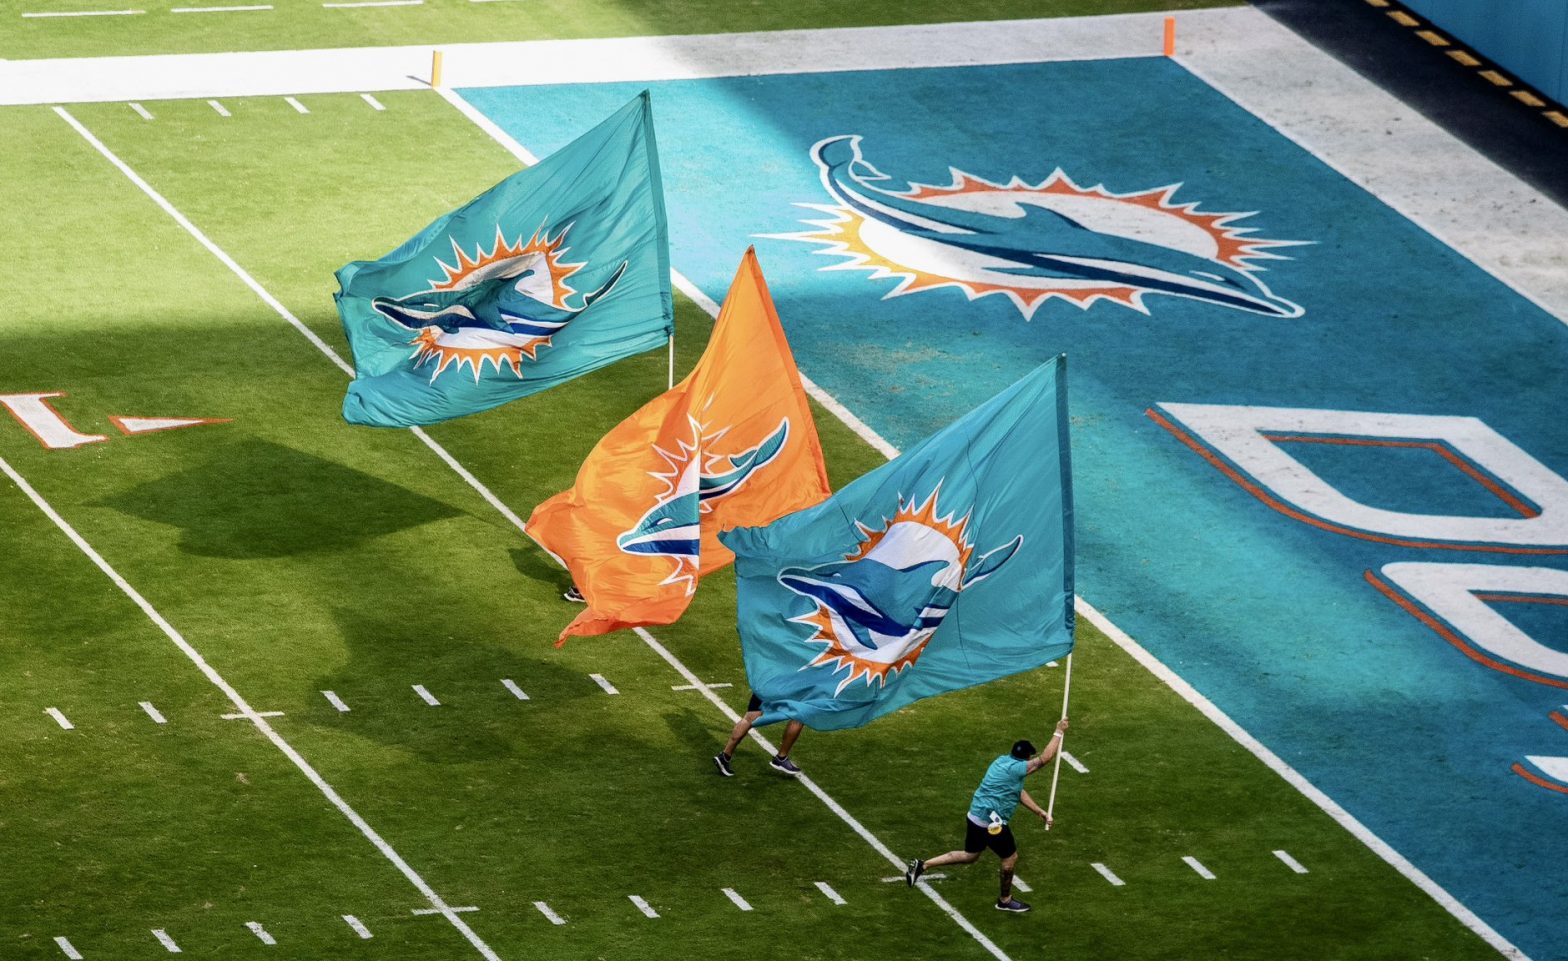 Miami Dolphins vs Green Bay Packers weather report: What is the temperature at Hard Rock Stadium?